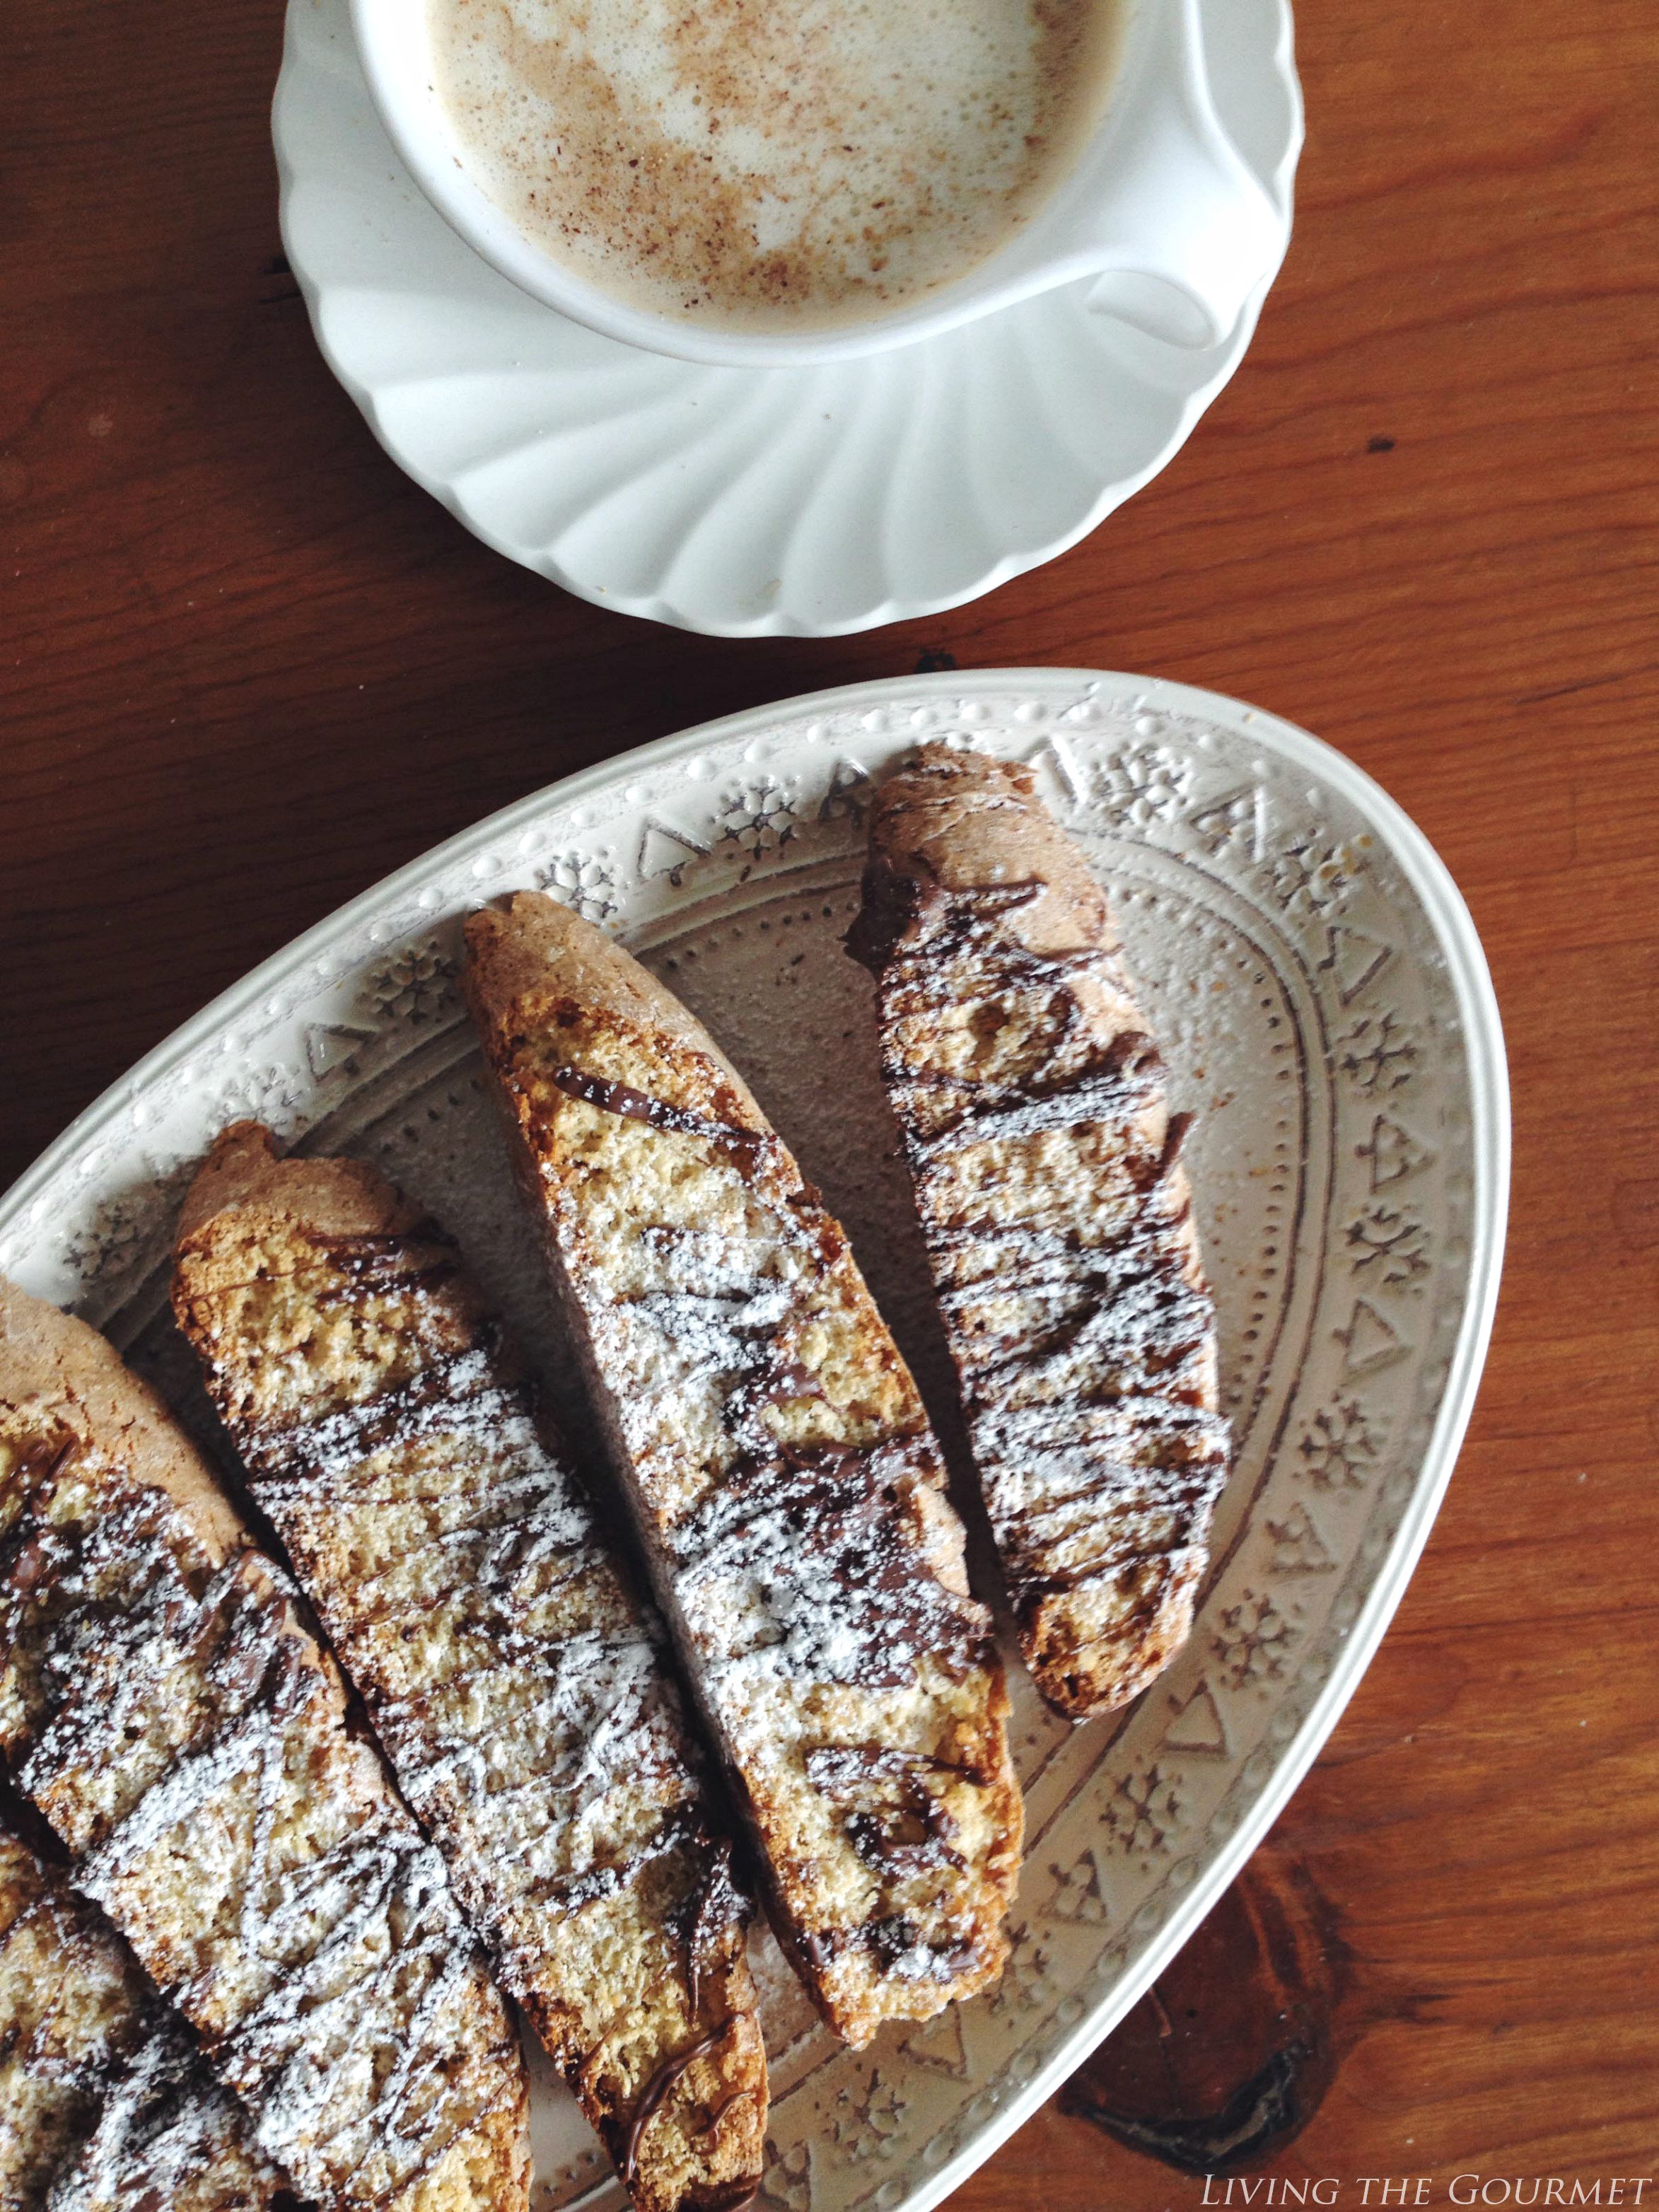 Living the Gourmet: Chocolate Almond Biscotti & An Invigorating Evening with Glade® | #Feelinvigorated #ad